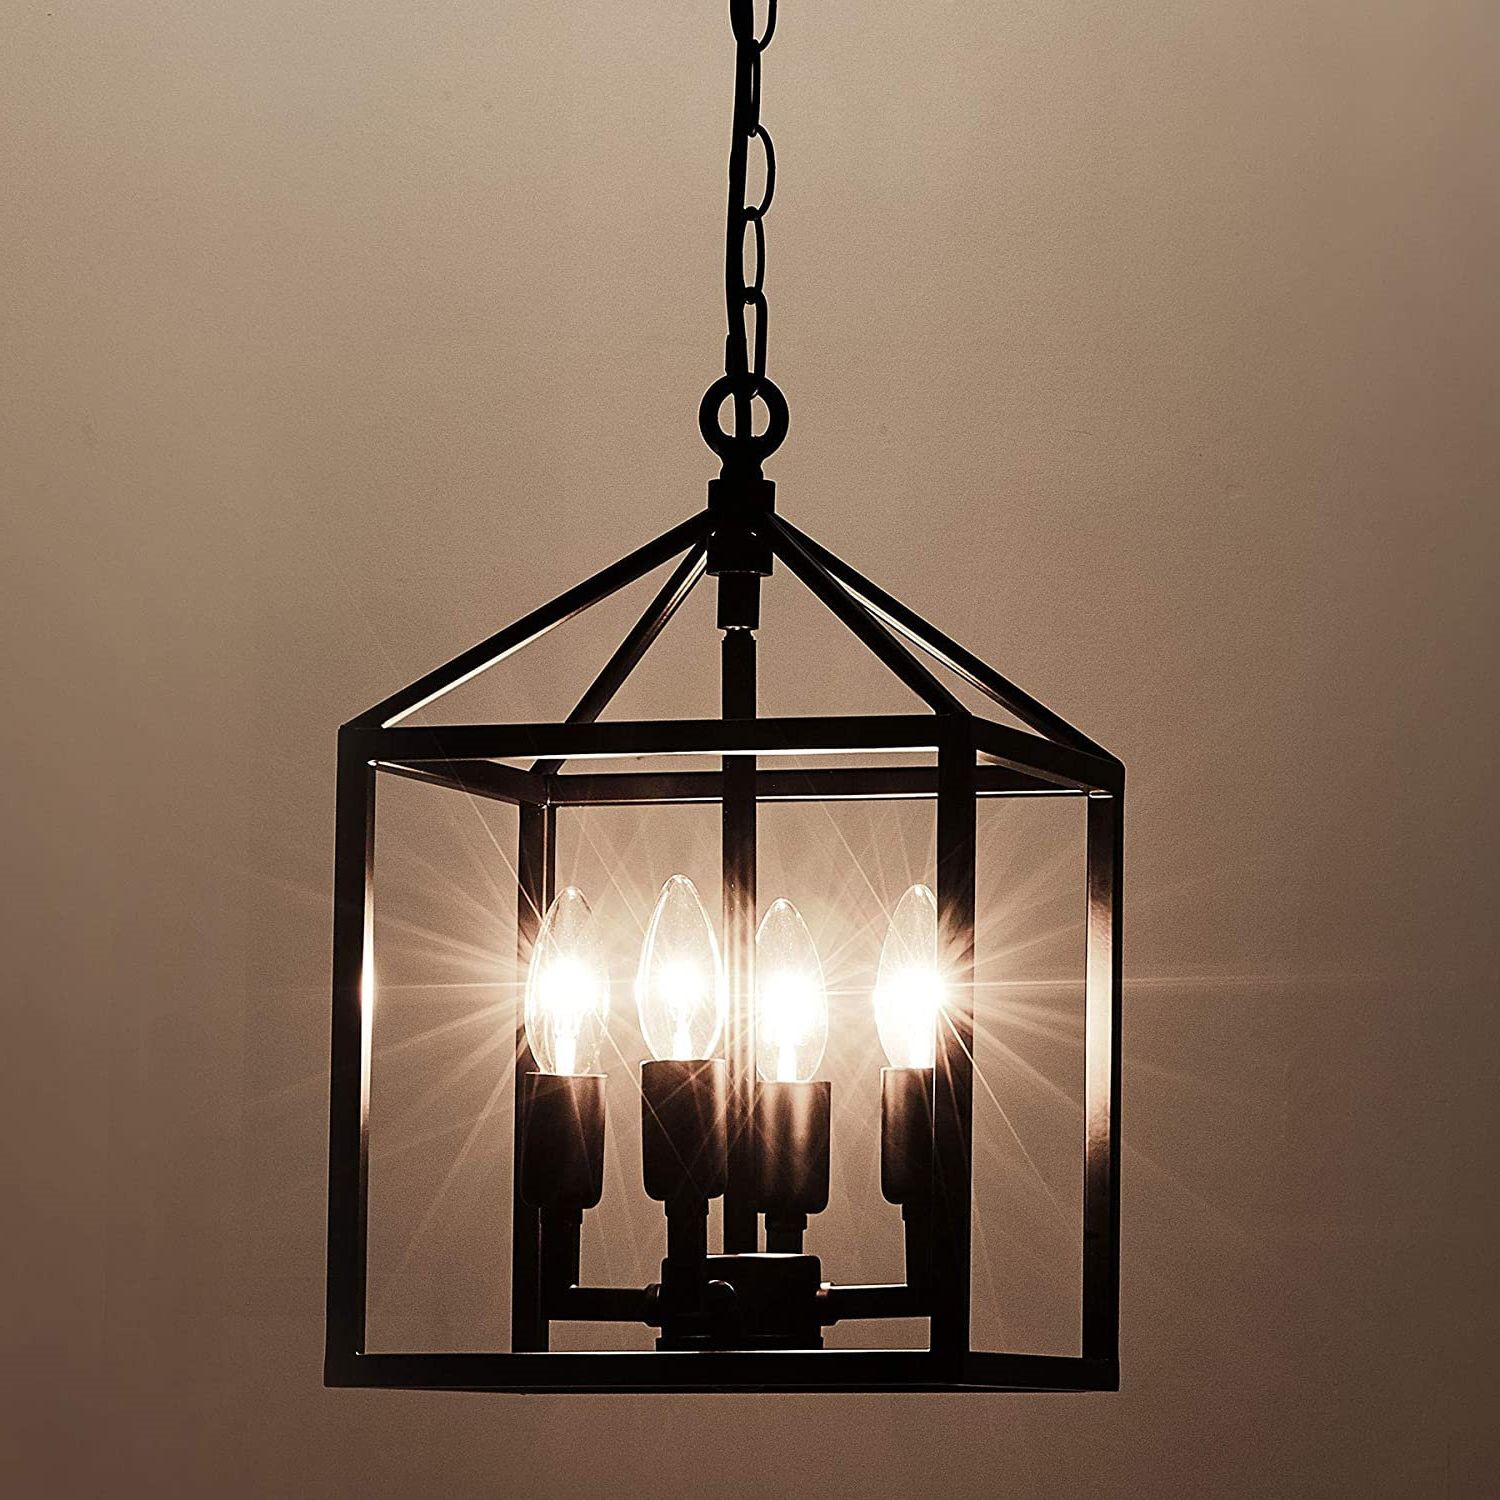 Gracie Oaks 4 Light Lantern Chandelier Light Fixture, Industrial Farmhouse Lantern  Pendant Light Square Cage, Black Lantern Chandelier Hanging For Kitchen  Island Foyer Entryway Bedroom – Wayfair Canada Throughout Widely Used Rustic Black Lantern Chandeliers (View 14 of 15)